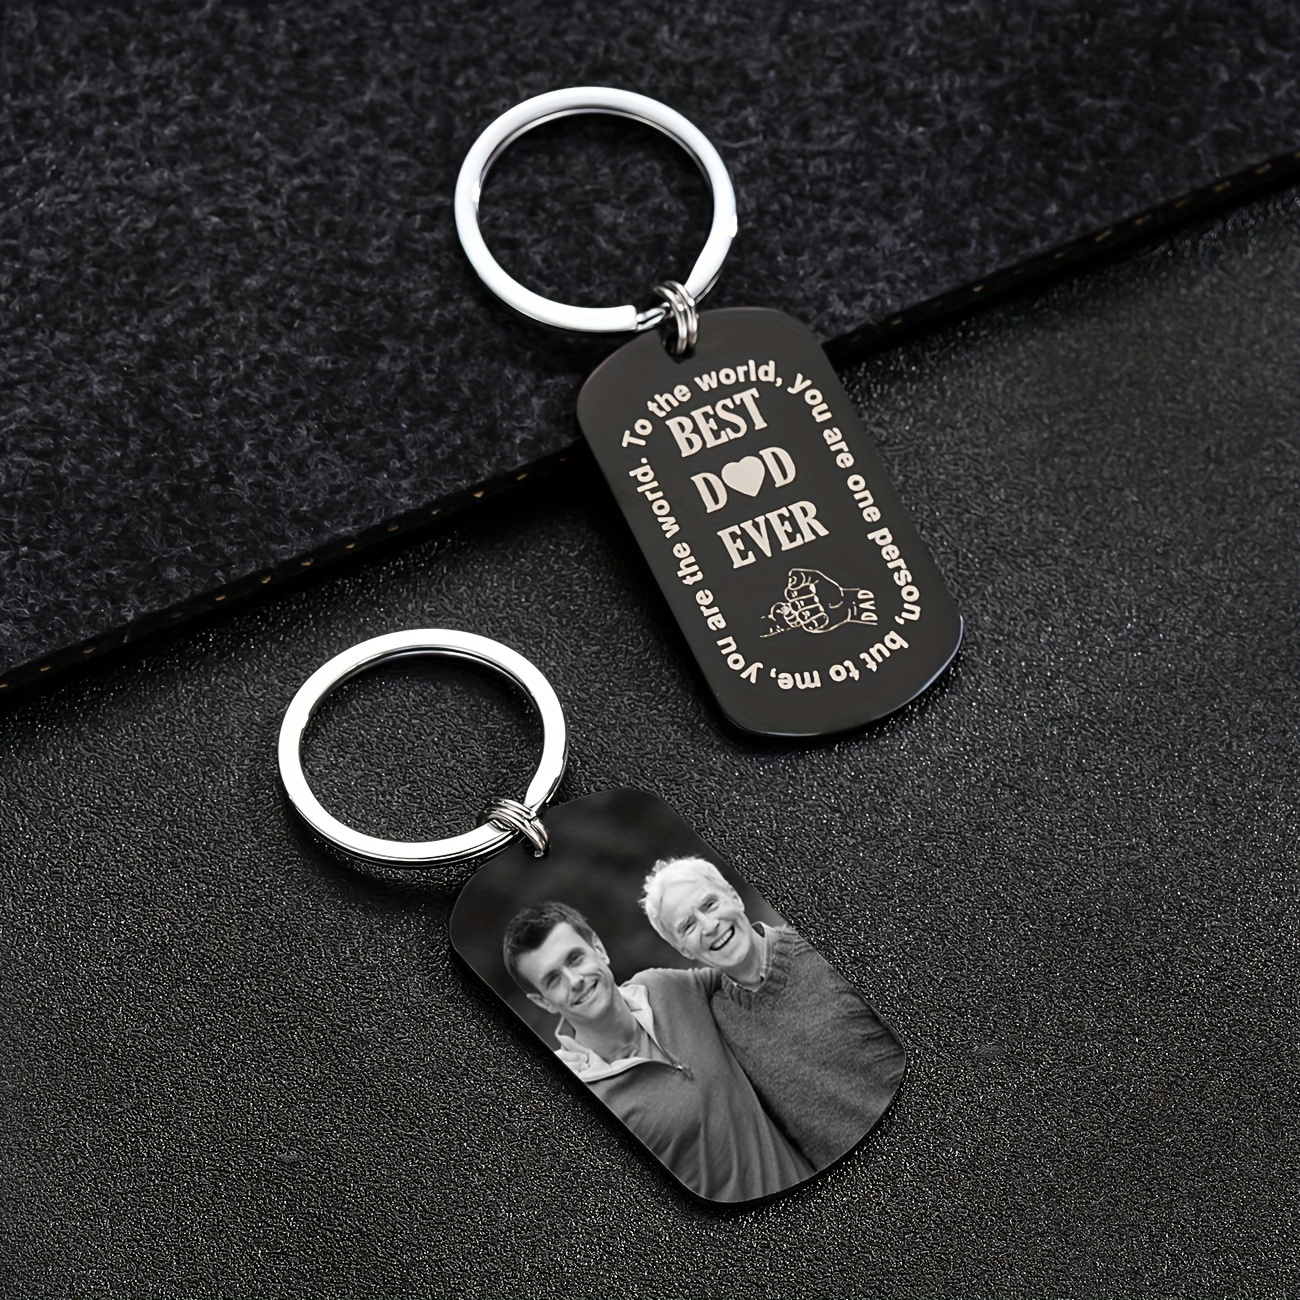 

Keychain For Men, Personalized Photo Keychain, Custom Keyring With Picture Engraved, Best Dad Keychain, Gift For Father's Day